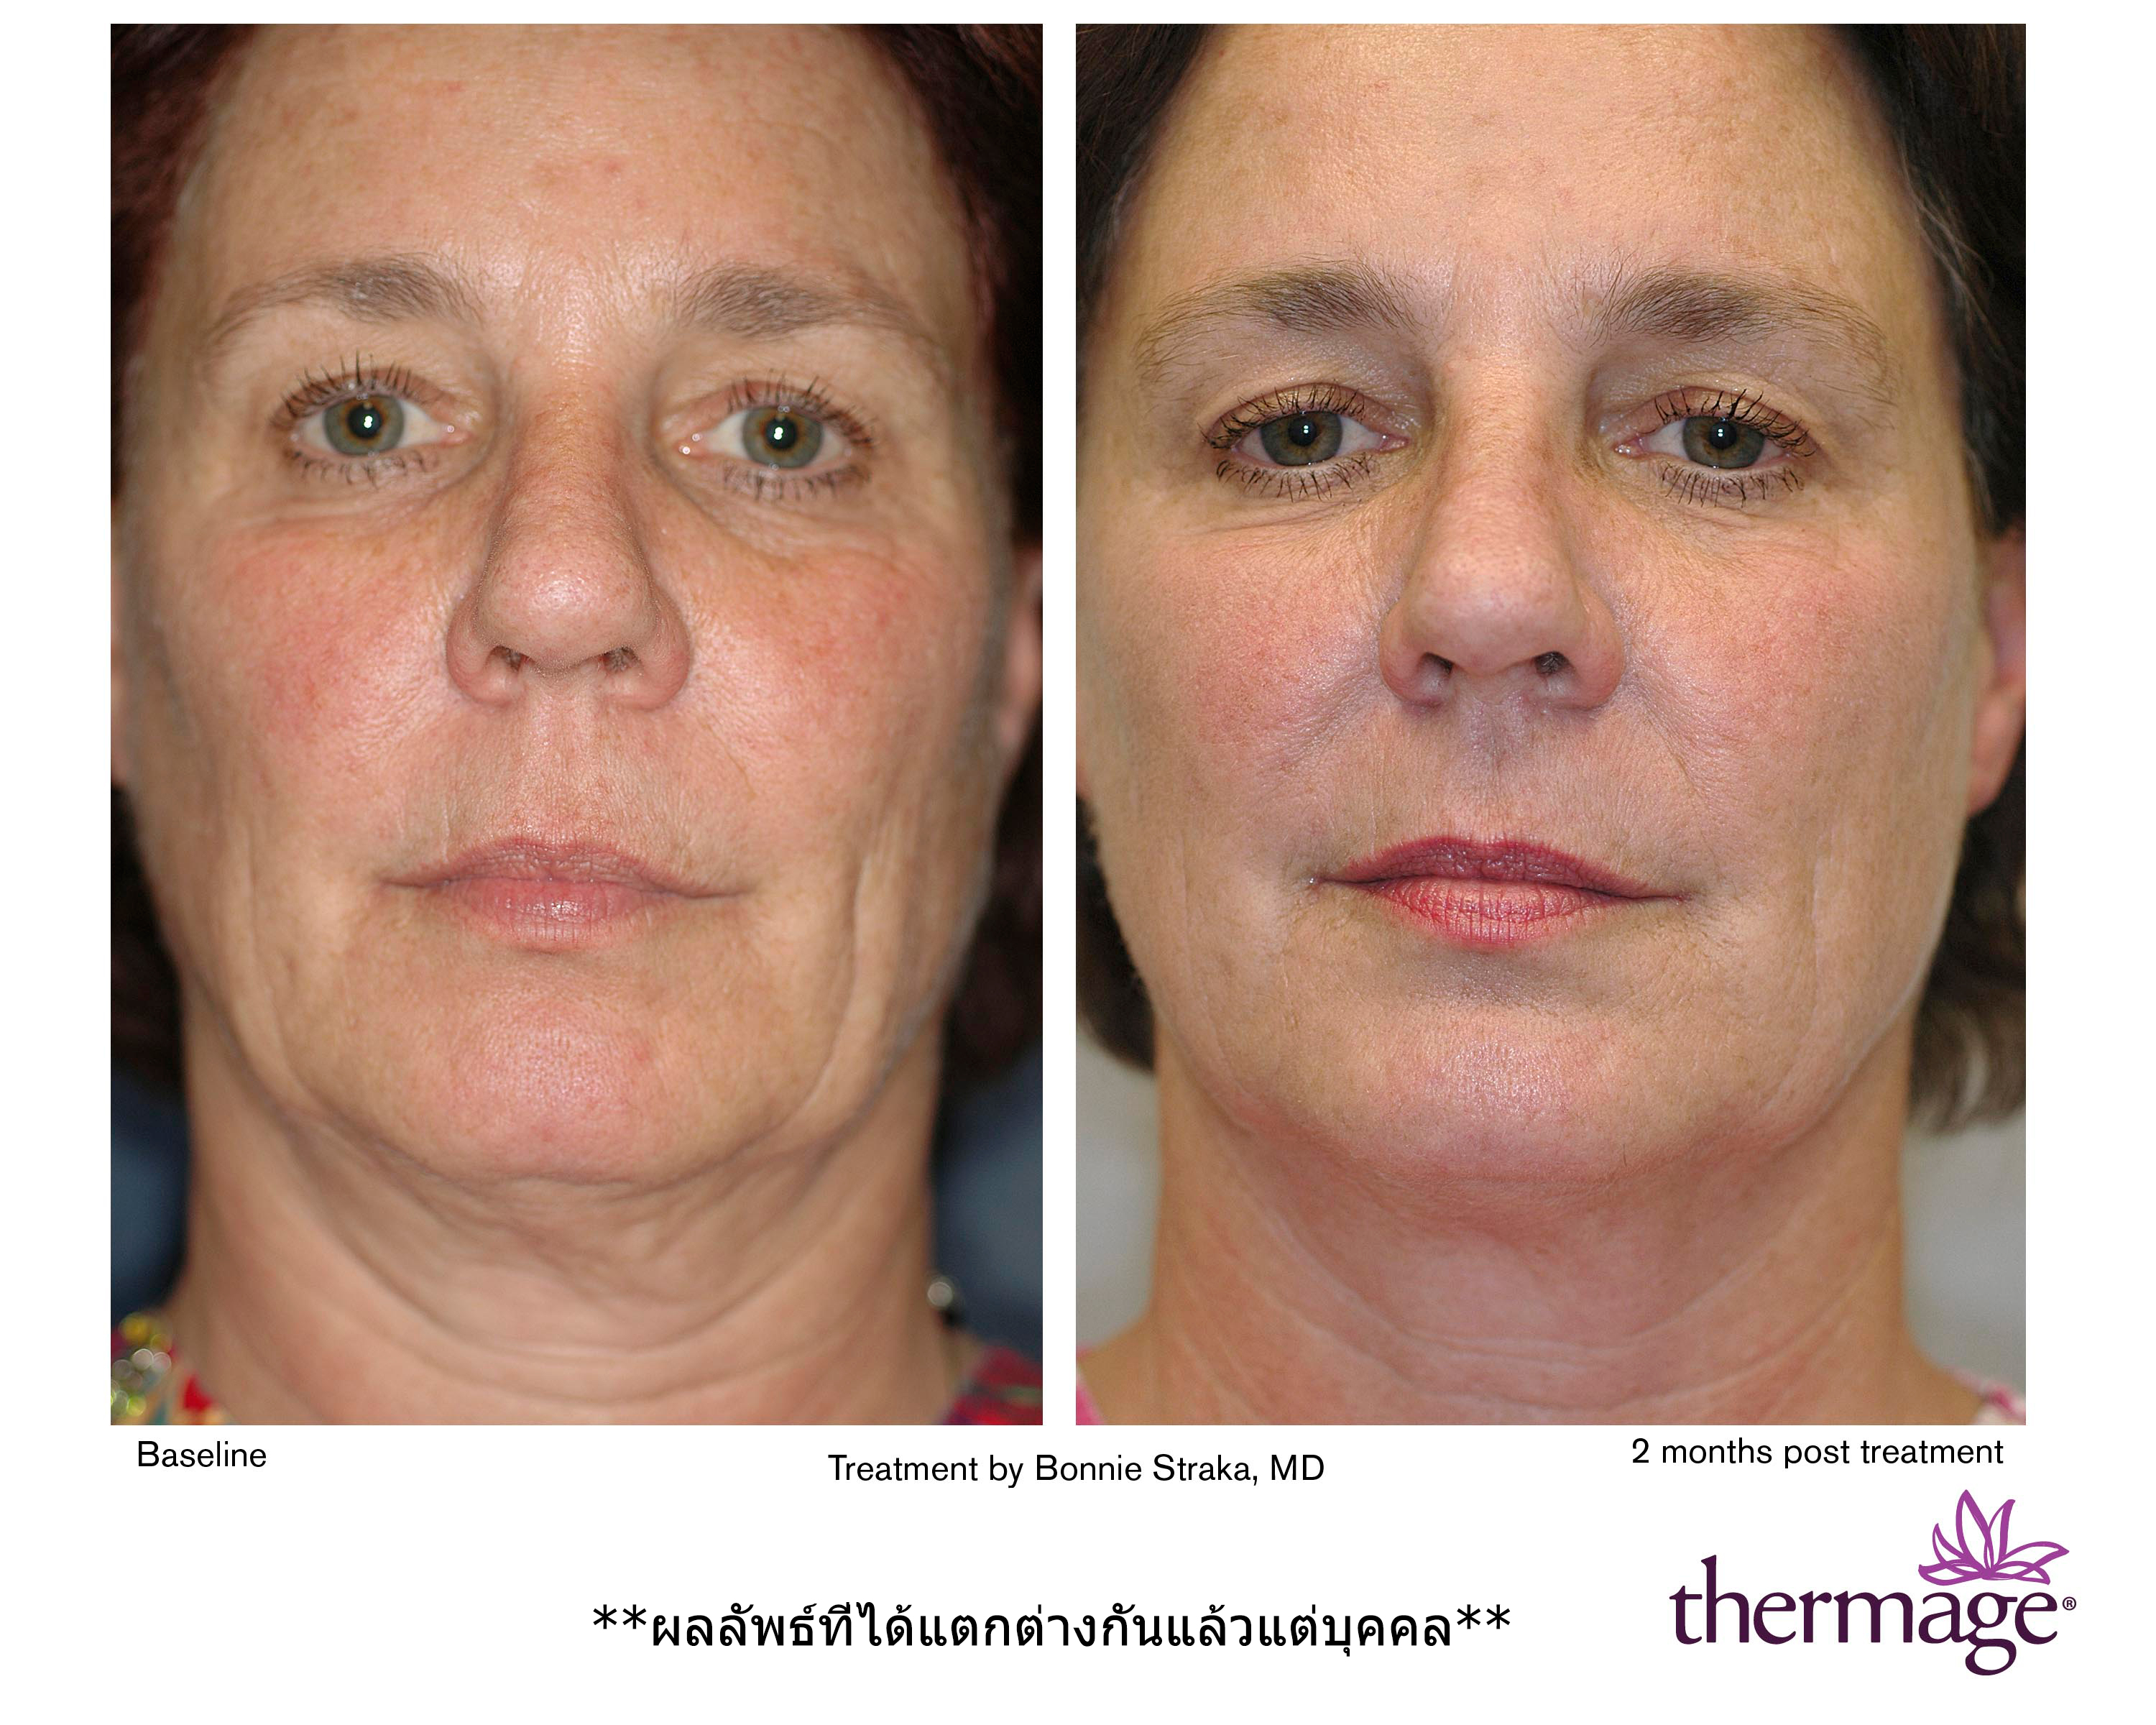 Lower face and neck treatment  by Bonnie Straka, MD. Pre and 2 month follow up. 1.5cm/4 passes/Level 62